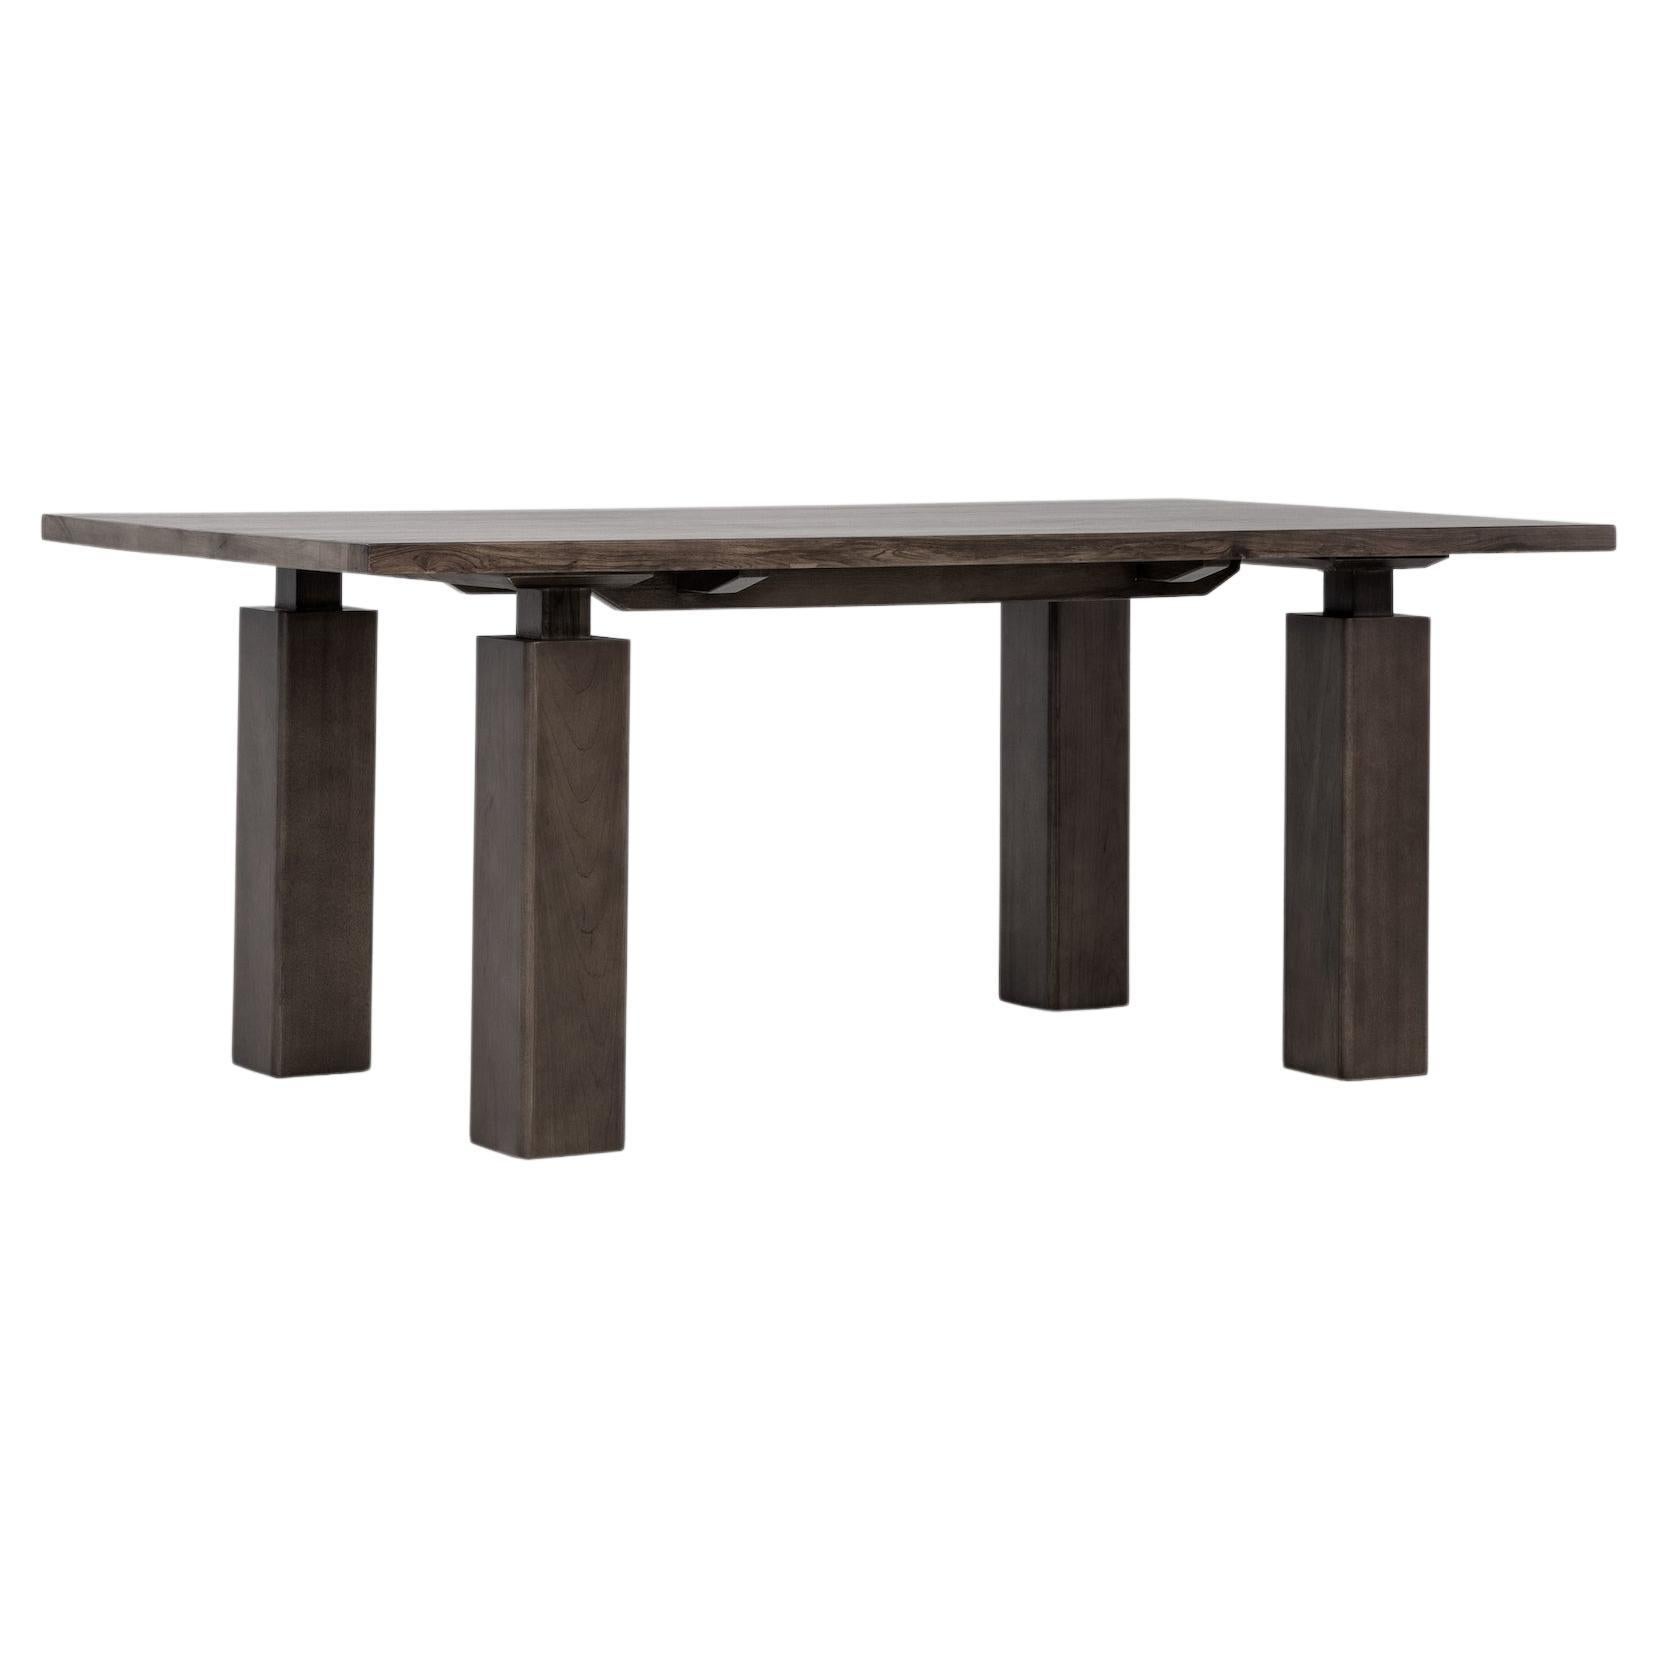 Wolo 76" Dining Table, Minimalist Dining Table in Cocoa For Sale